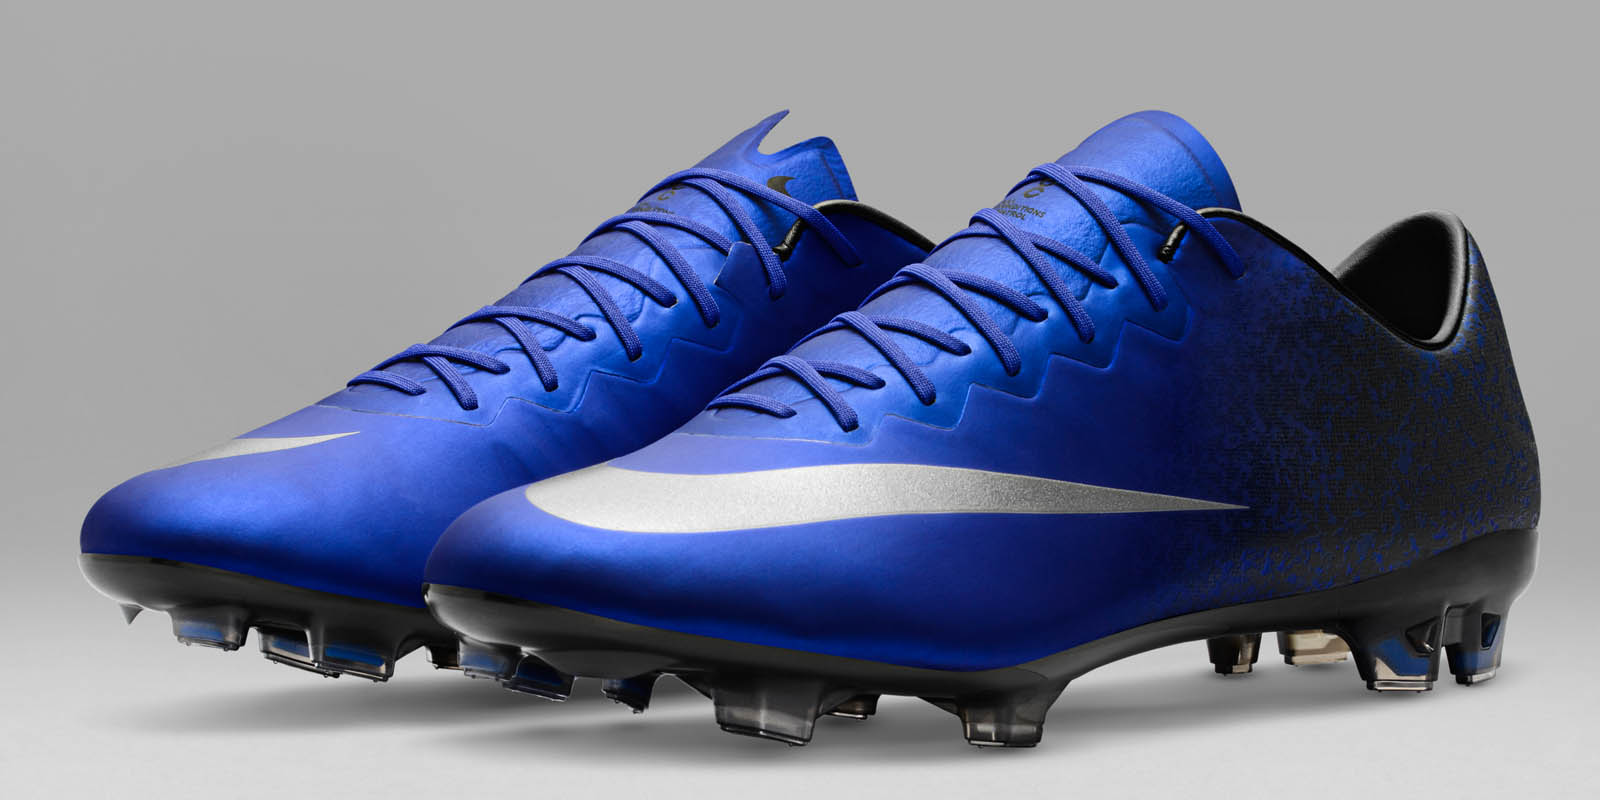 cr7 cleats 2016